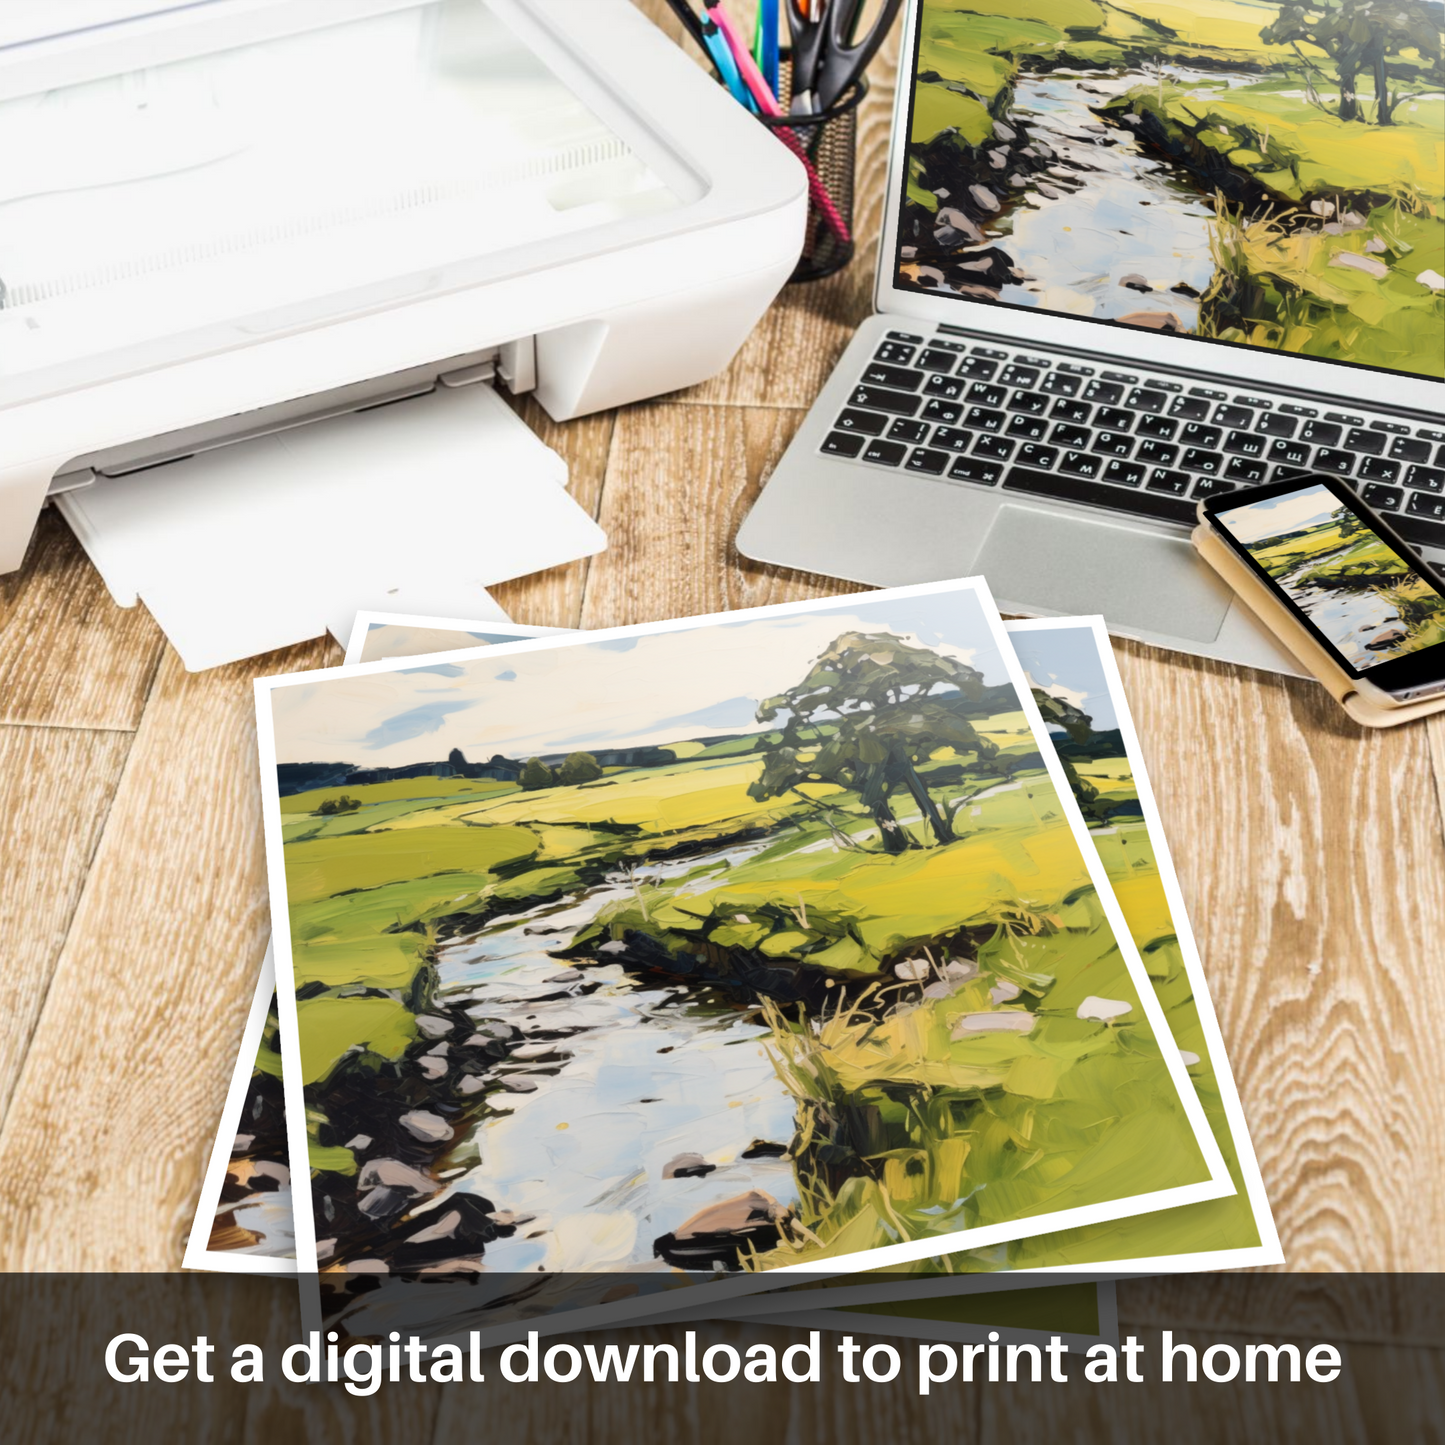 Downloadable and printable picture of River Deveron, Aberdeenshire in summer